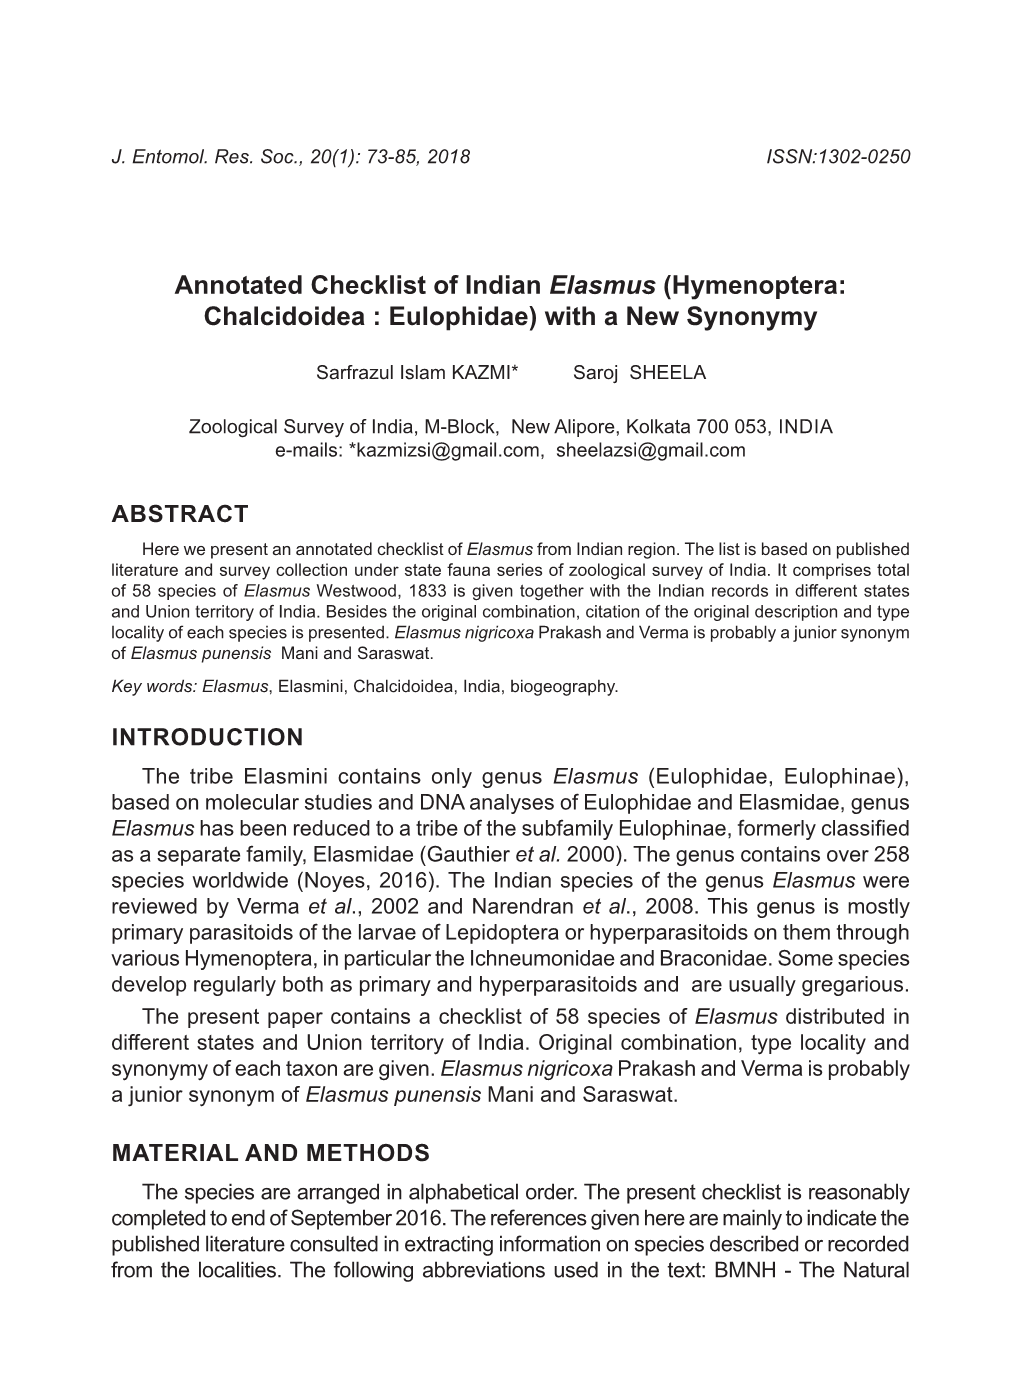 Annotated Checklist of Indian Elasmus (Hymenoptera: Chalcidoidea : Eulophidae) with a New Synonymy